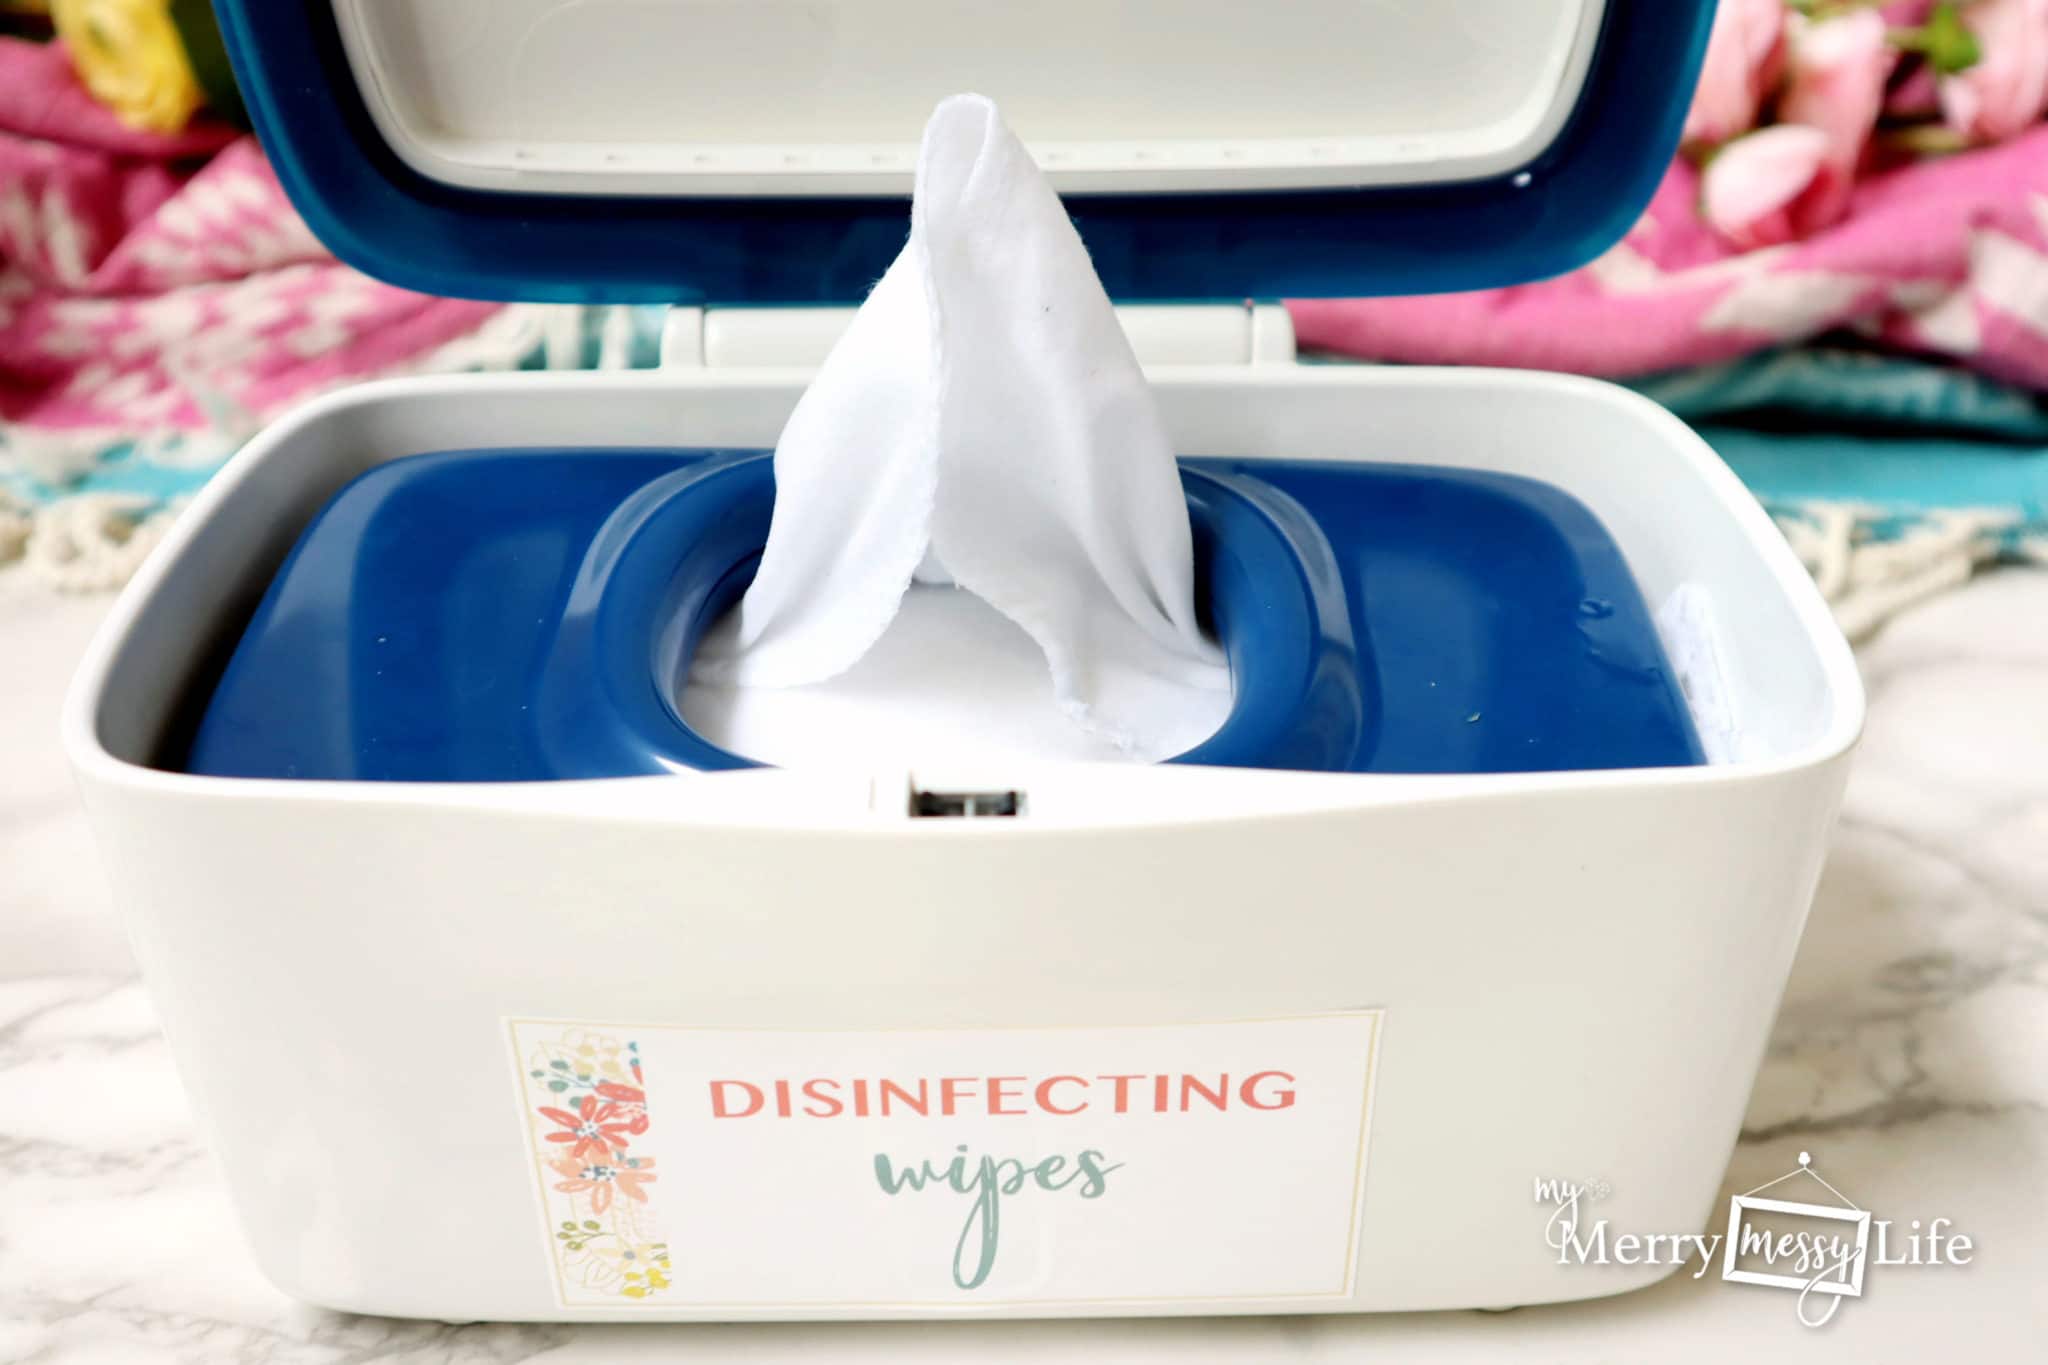 DIY Natural Disinfecting Wipes with Hydrogen Peroxide, Alcohol and Essential Oils